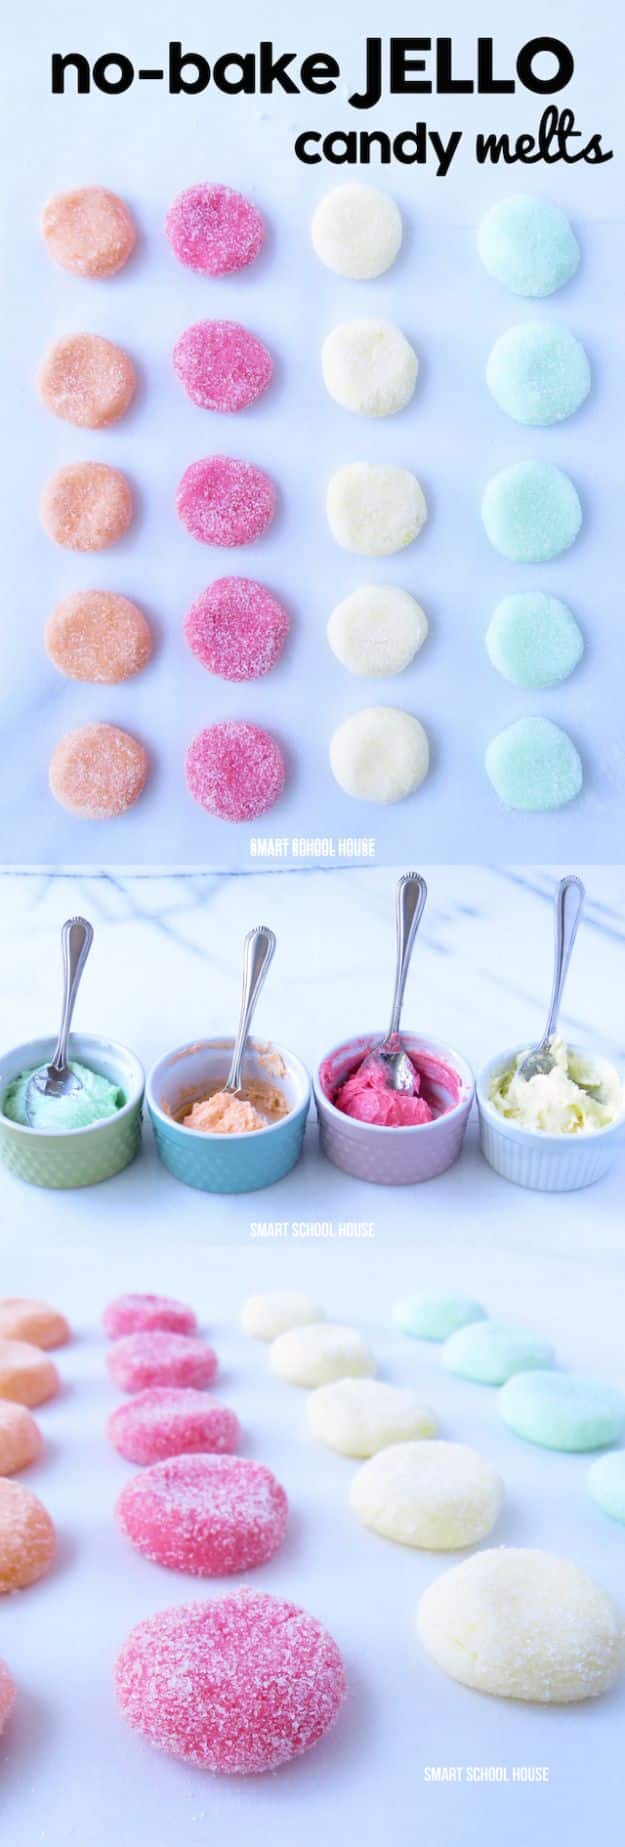 Best Recipes To Teach Your Kids To Cook - Jello Candy Melts - Easy Ideas To Show Children How to Prepare Food - Kid Friendly Recipes That Boys and Girls Can Make Themselves - No Bake, 5 Minute Foods, Healthy Snacks, Salads, Dips, Roll Ups, Vegetables and Simple Desserts - Recipes To Learn How To Make Fun Food http://diyjoy.com/best-recipes-teach-kids-to-cook